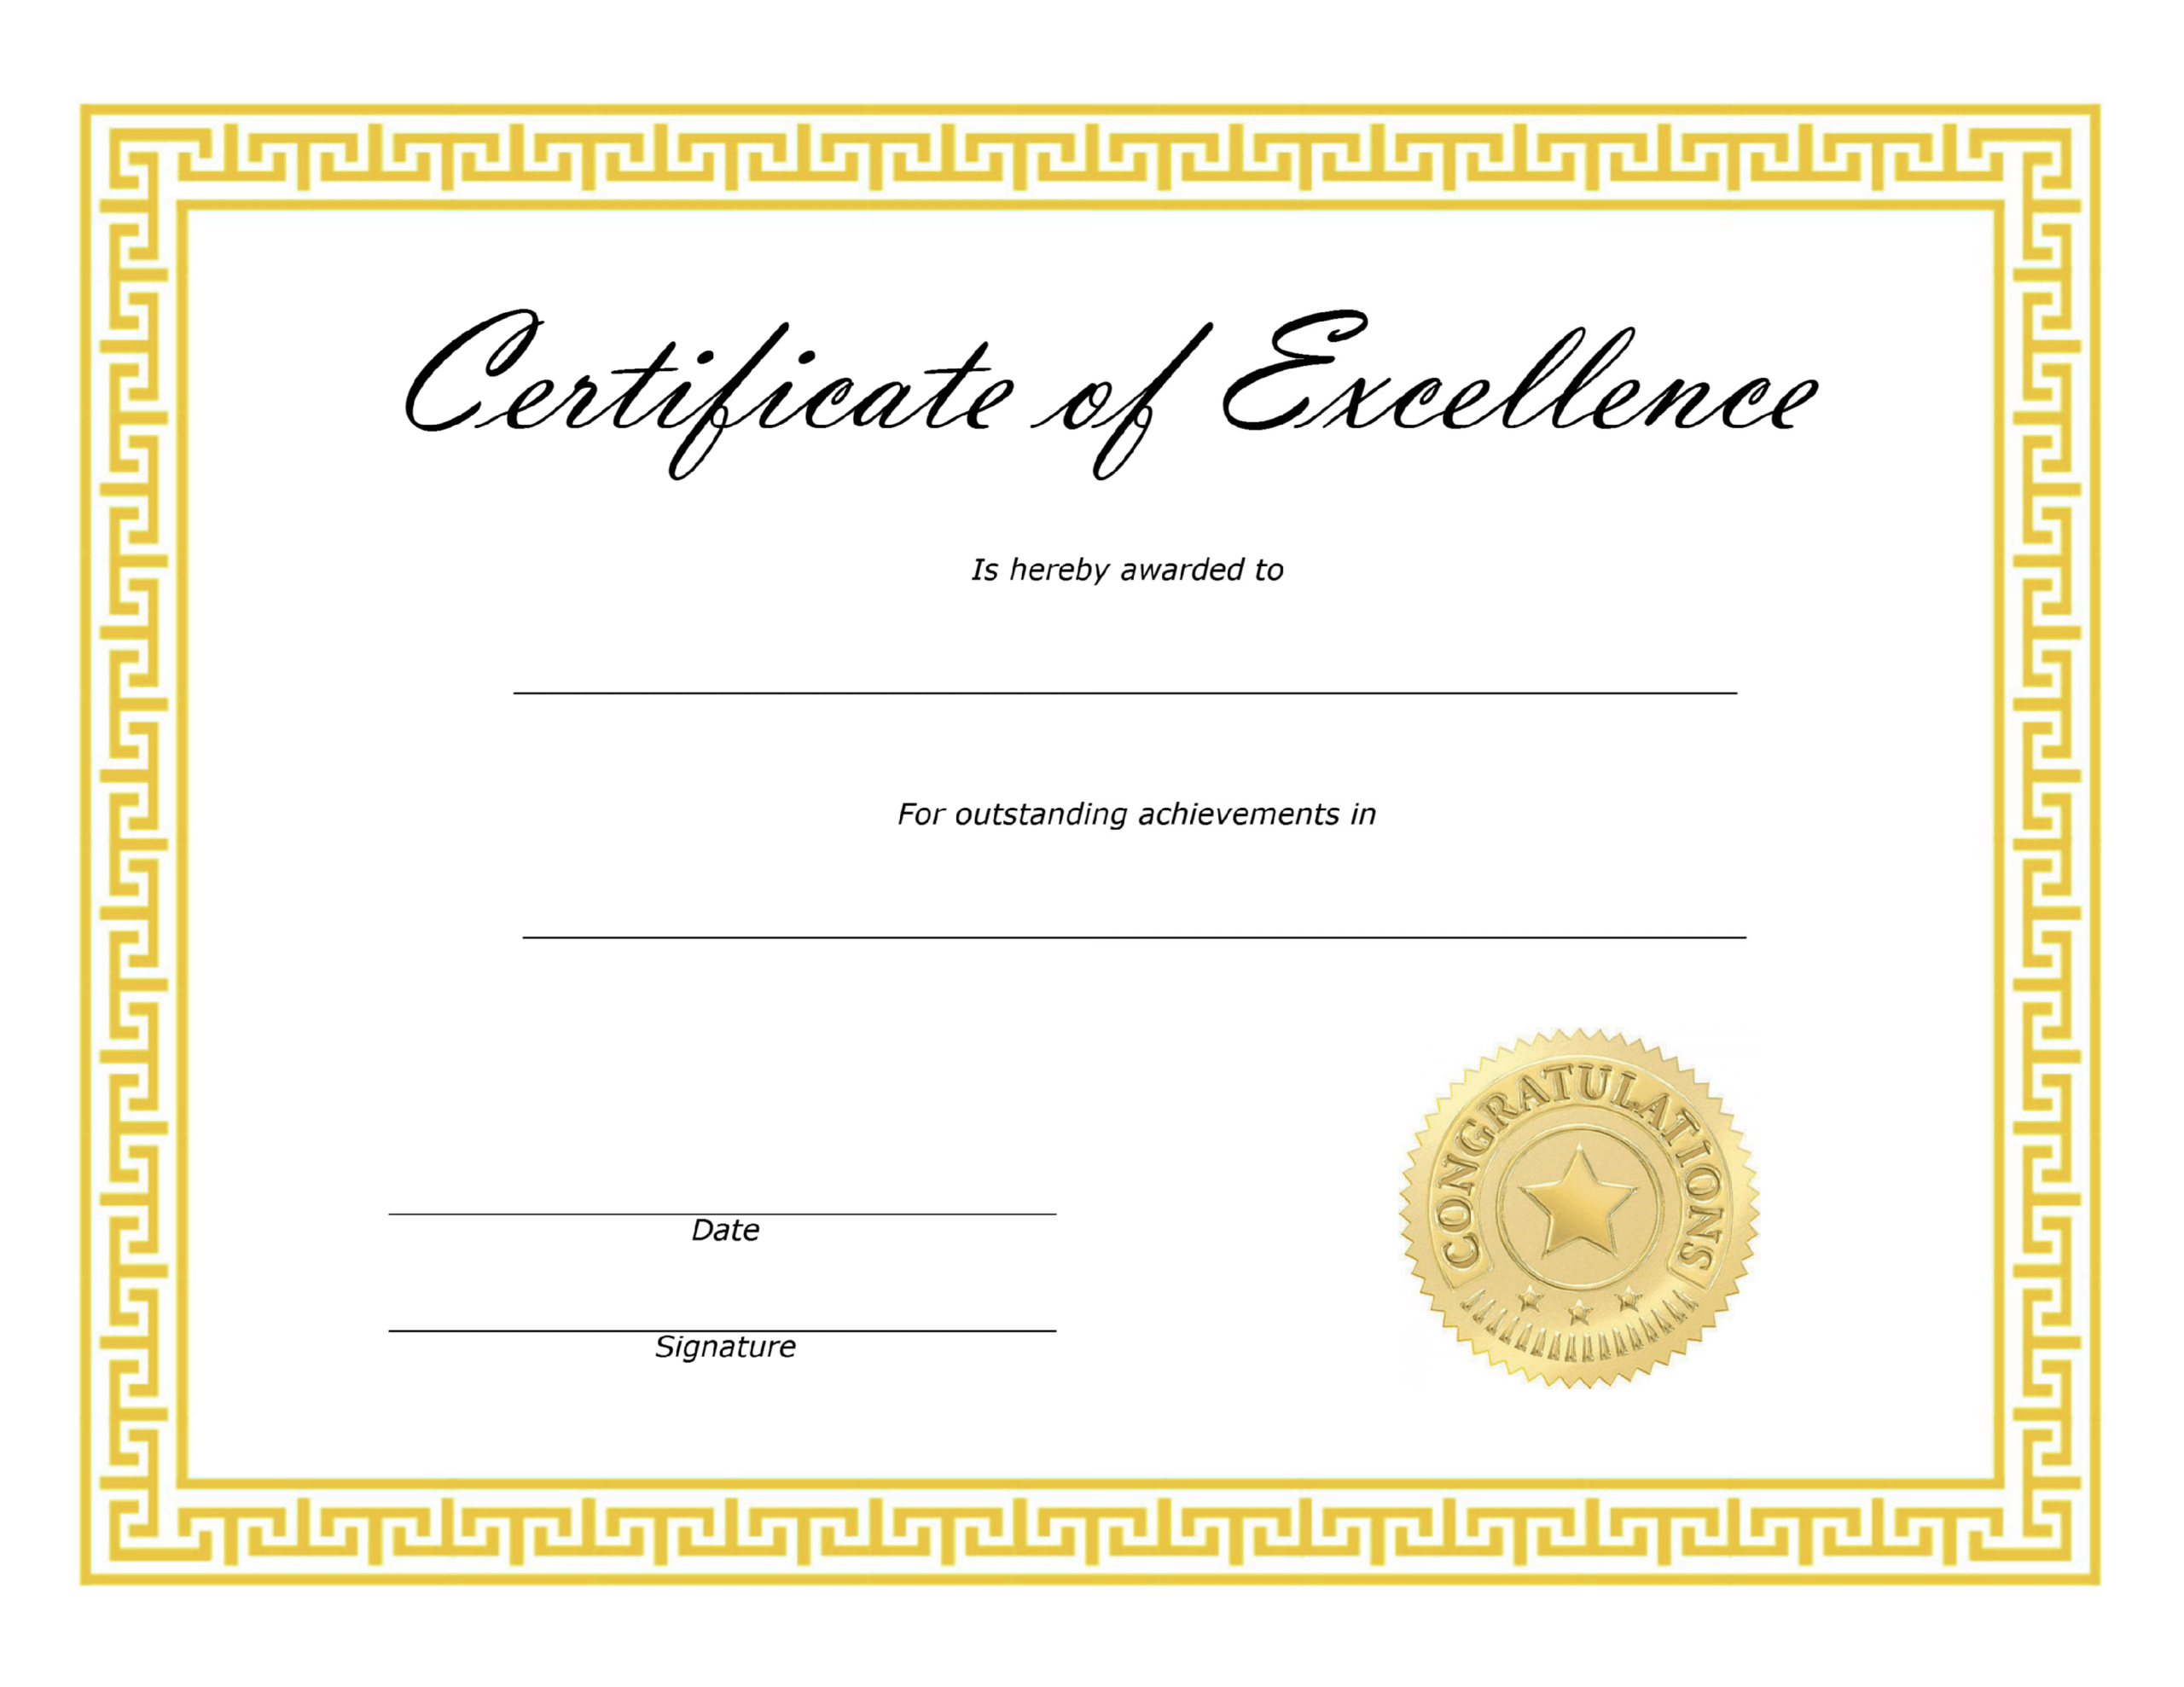 ❤️ Free Sample Certificate Of Excellence Templates❤️ Regarding Certificate Of Excellence Template Free Download